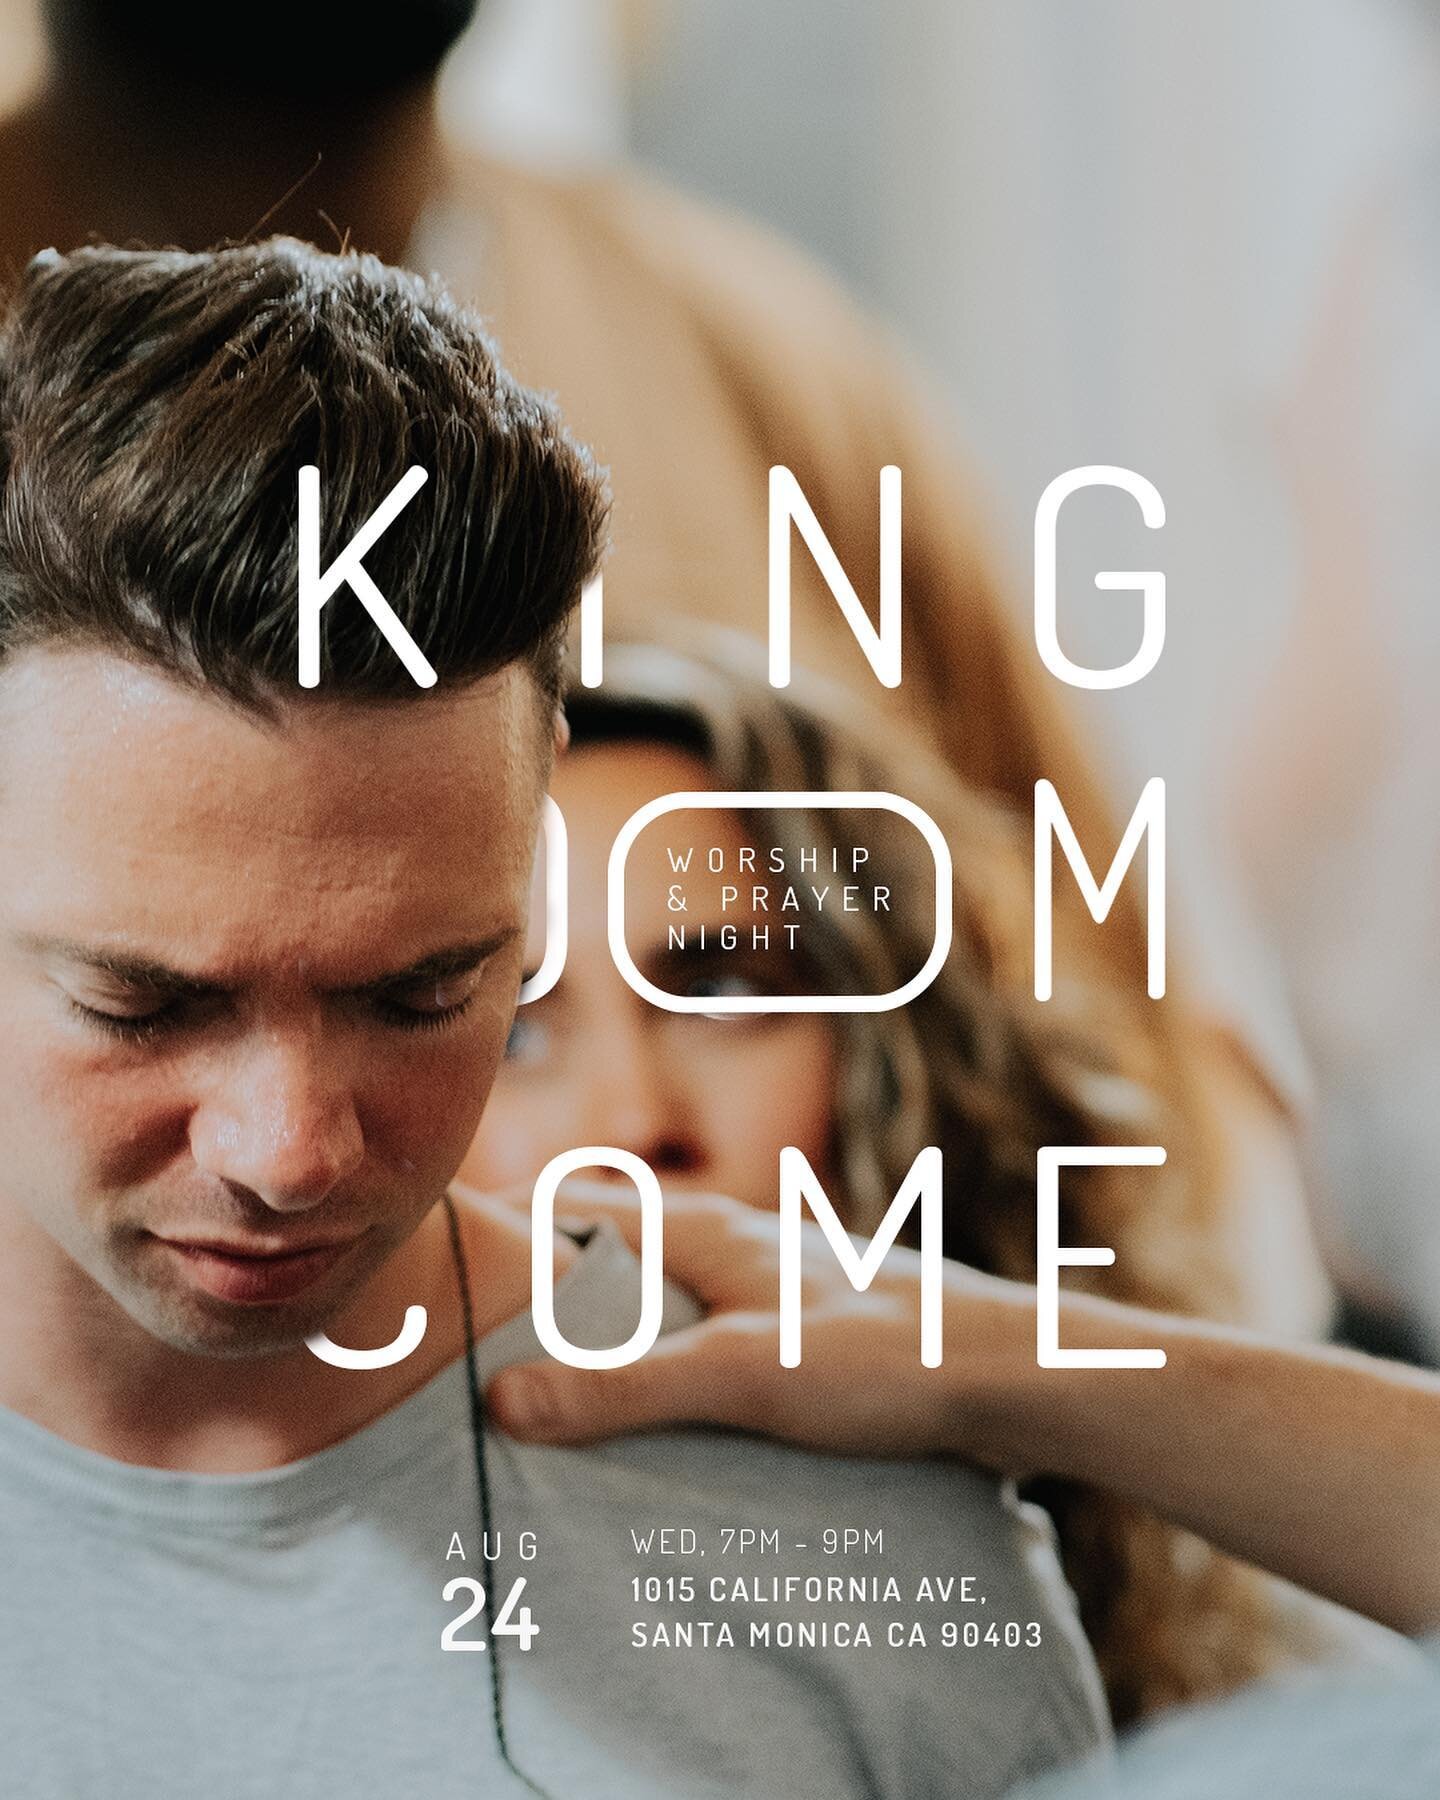 Kingdom Come is back TOMORROW! Join us for an incredible night of encounter as we worship, pray and intercede for our kids and youth who are going back to school.

Kingdom Come
Wednesday, Aug 24
⏰ 7pm - 9pm
📍1015 California Ave, Santa Monica CA 9040